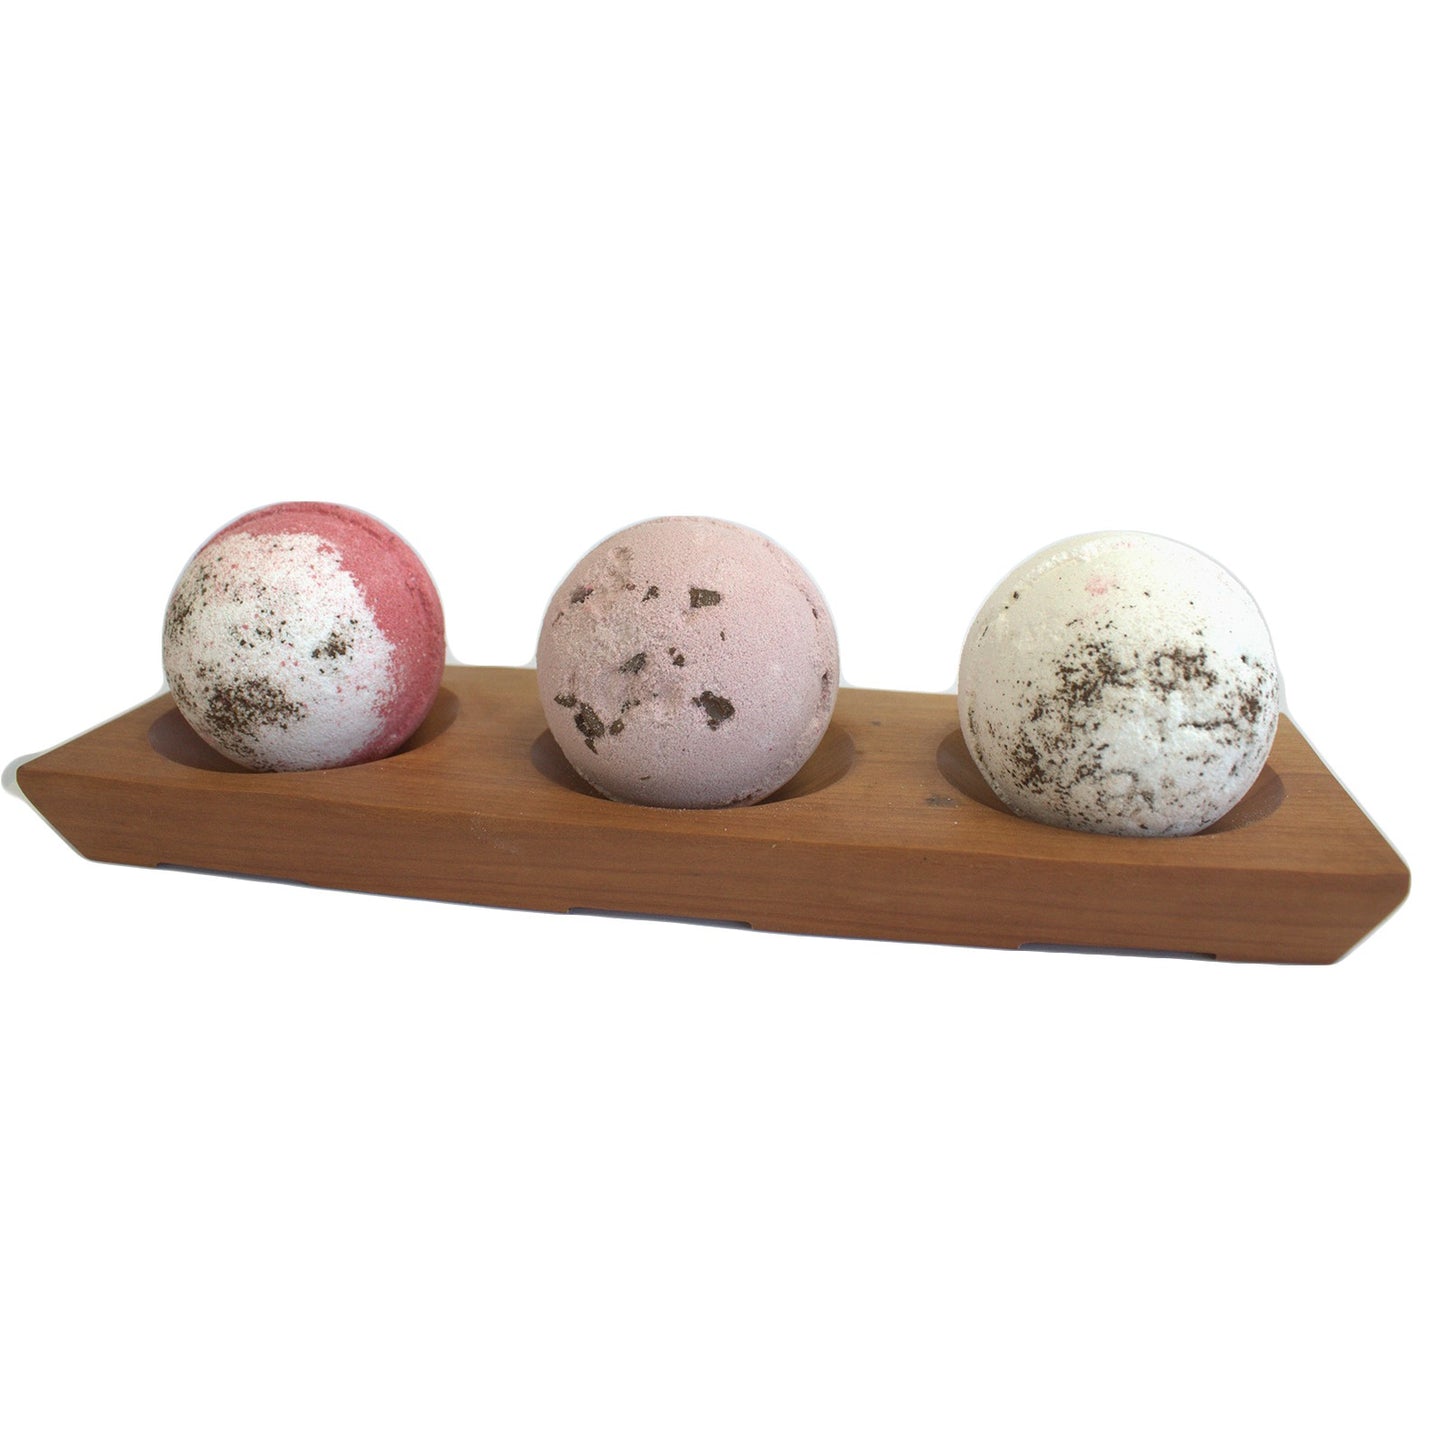 Large wooden Bath Bomb Holder with 3 Jumbo Shea Butter Bath Bombs